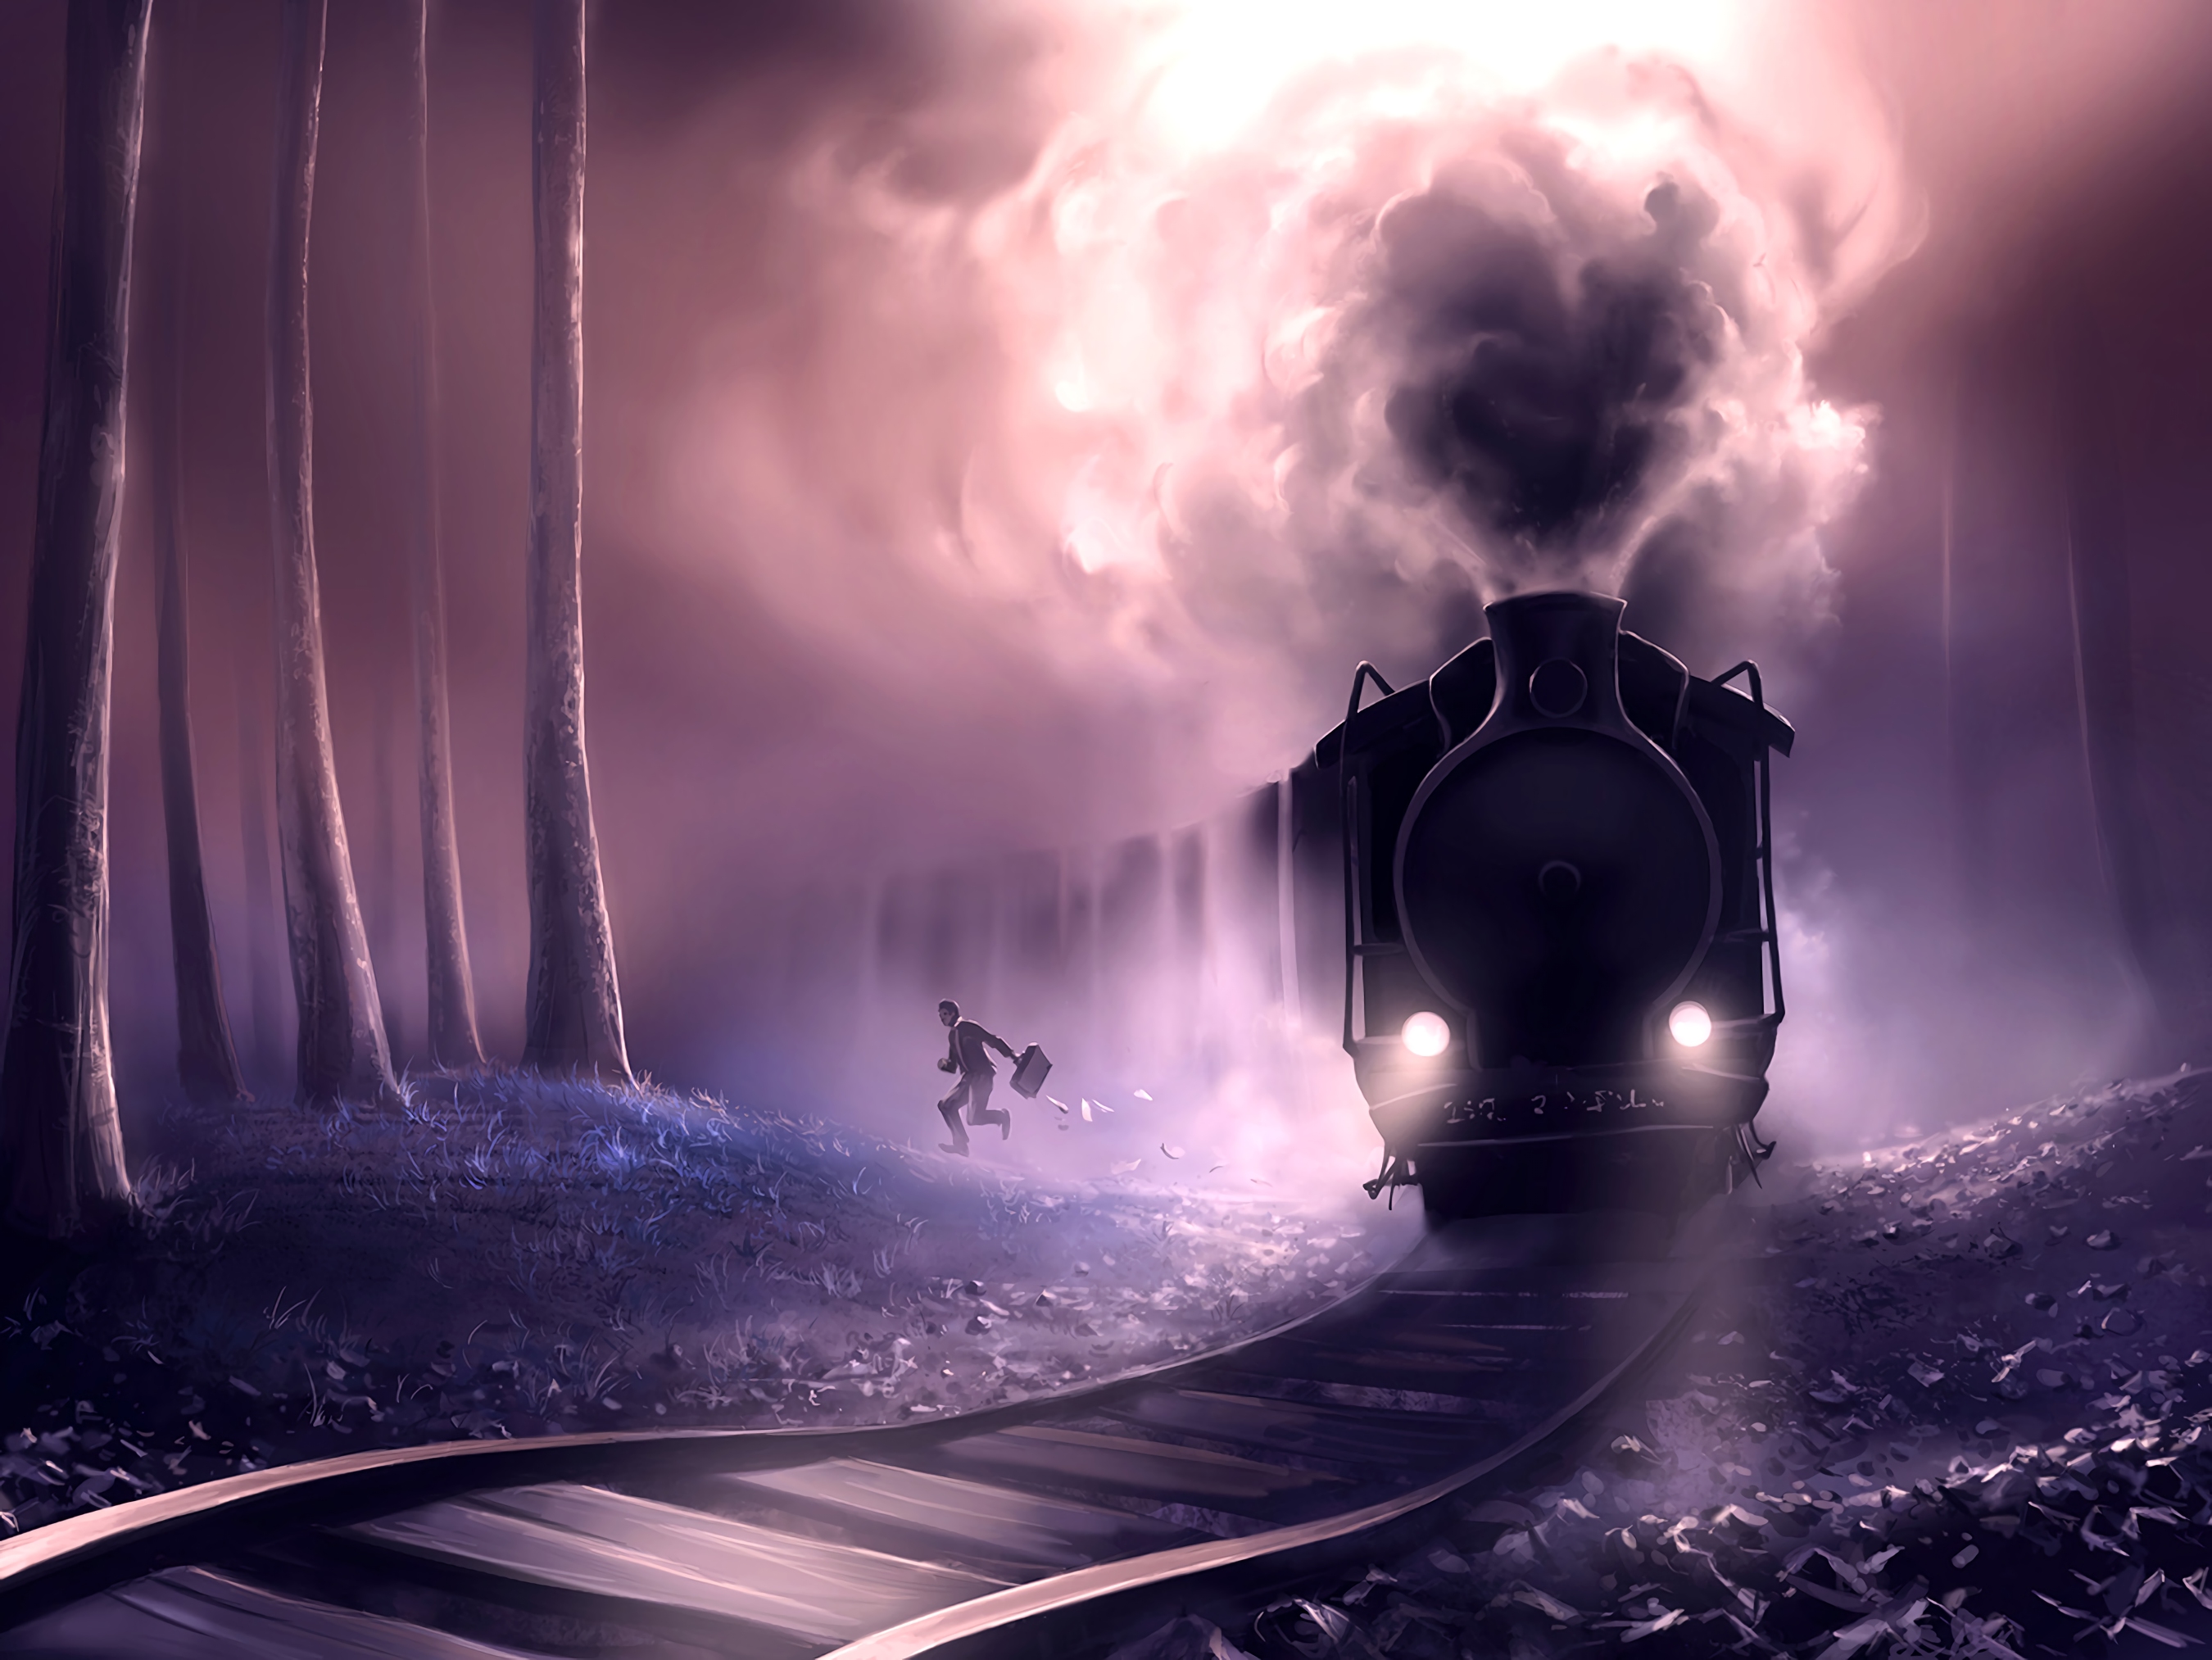 Man Escaping from Train on Foggy Purple Night by Cyril Rolando